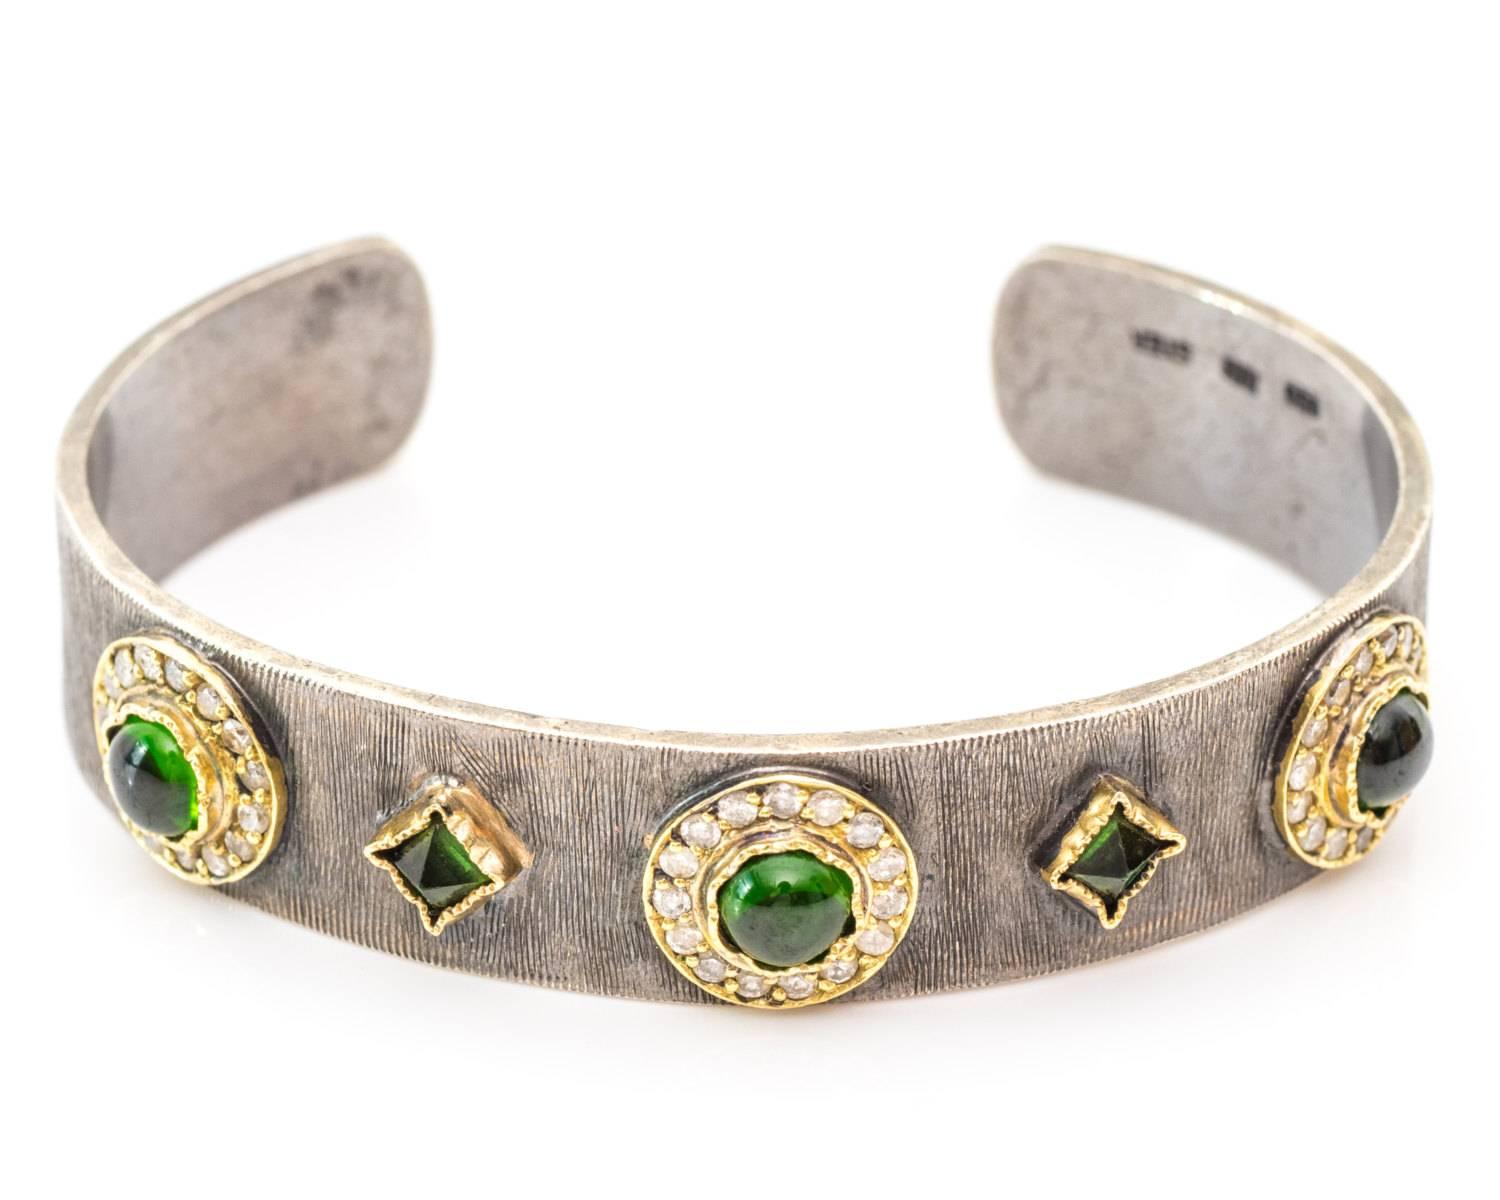 Beautiful Unique Cuff Bracelet made by Designer John Apel
Two-Tone Crafted in Sterling Silver and 18 Karat Yellow Gold
Adjustable, can Fit Most Wrist Sizes
Tsavorites and Diamonds

Diamond are all Bezel Set
Carat Weight: .75 carats